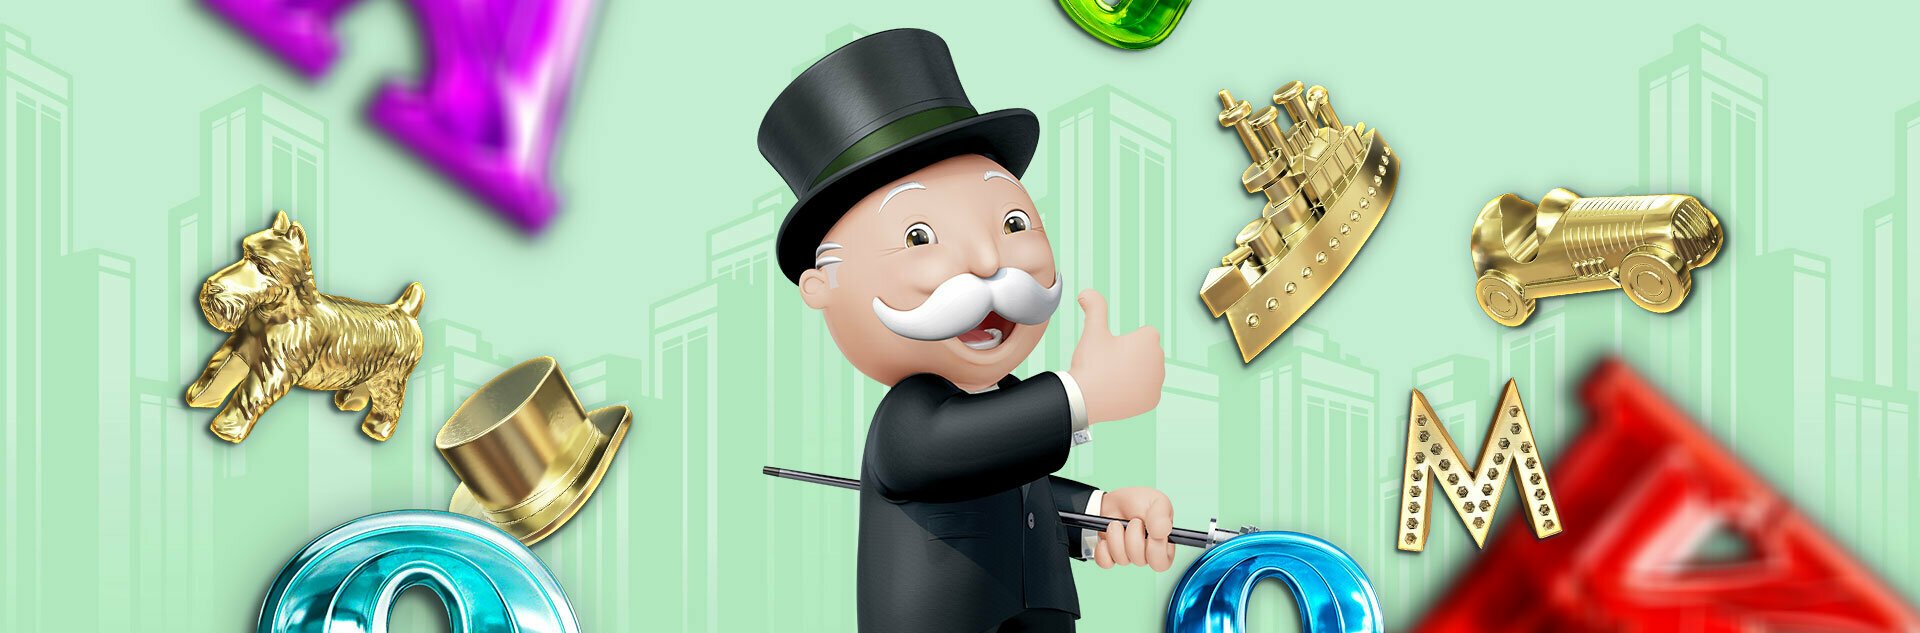 Monopoly Megaways™ Free Spins